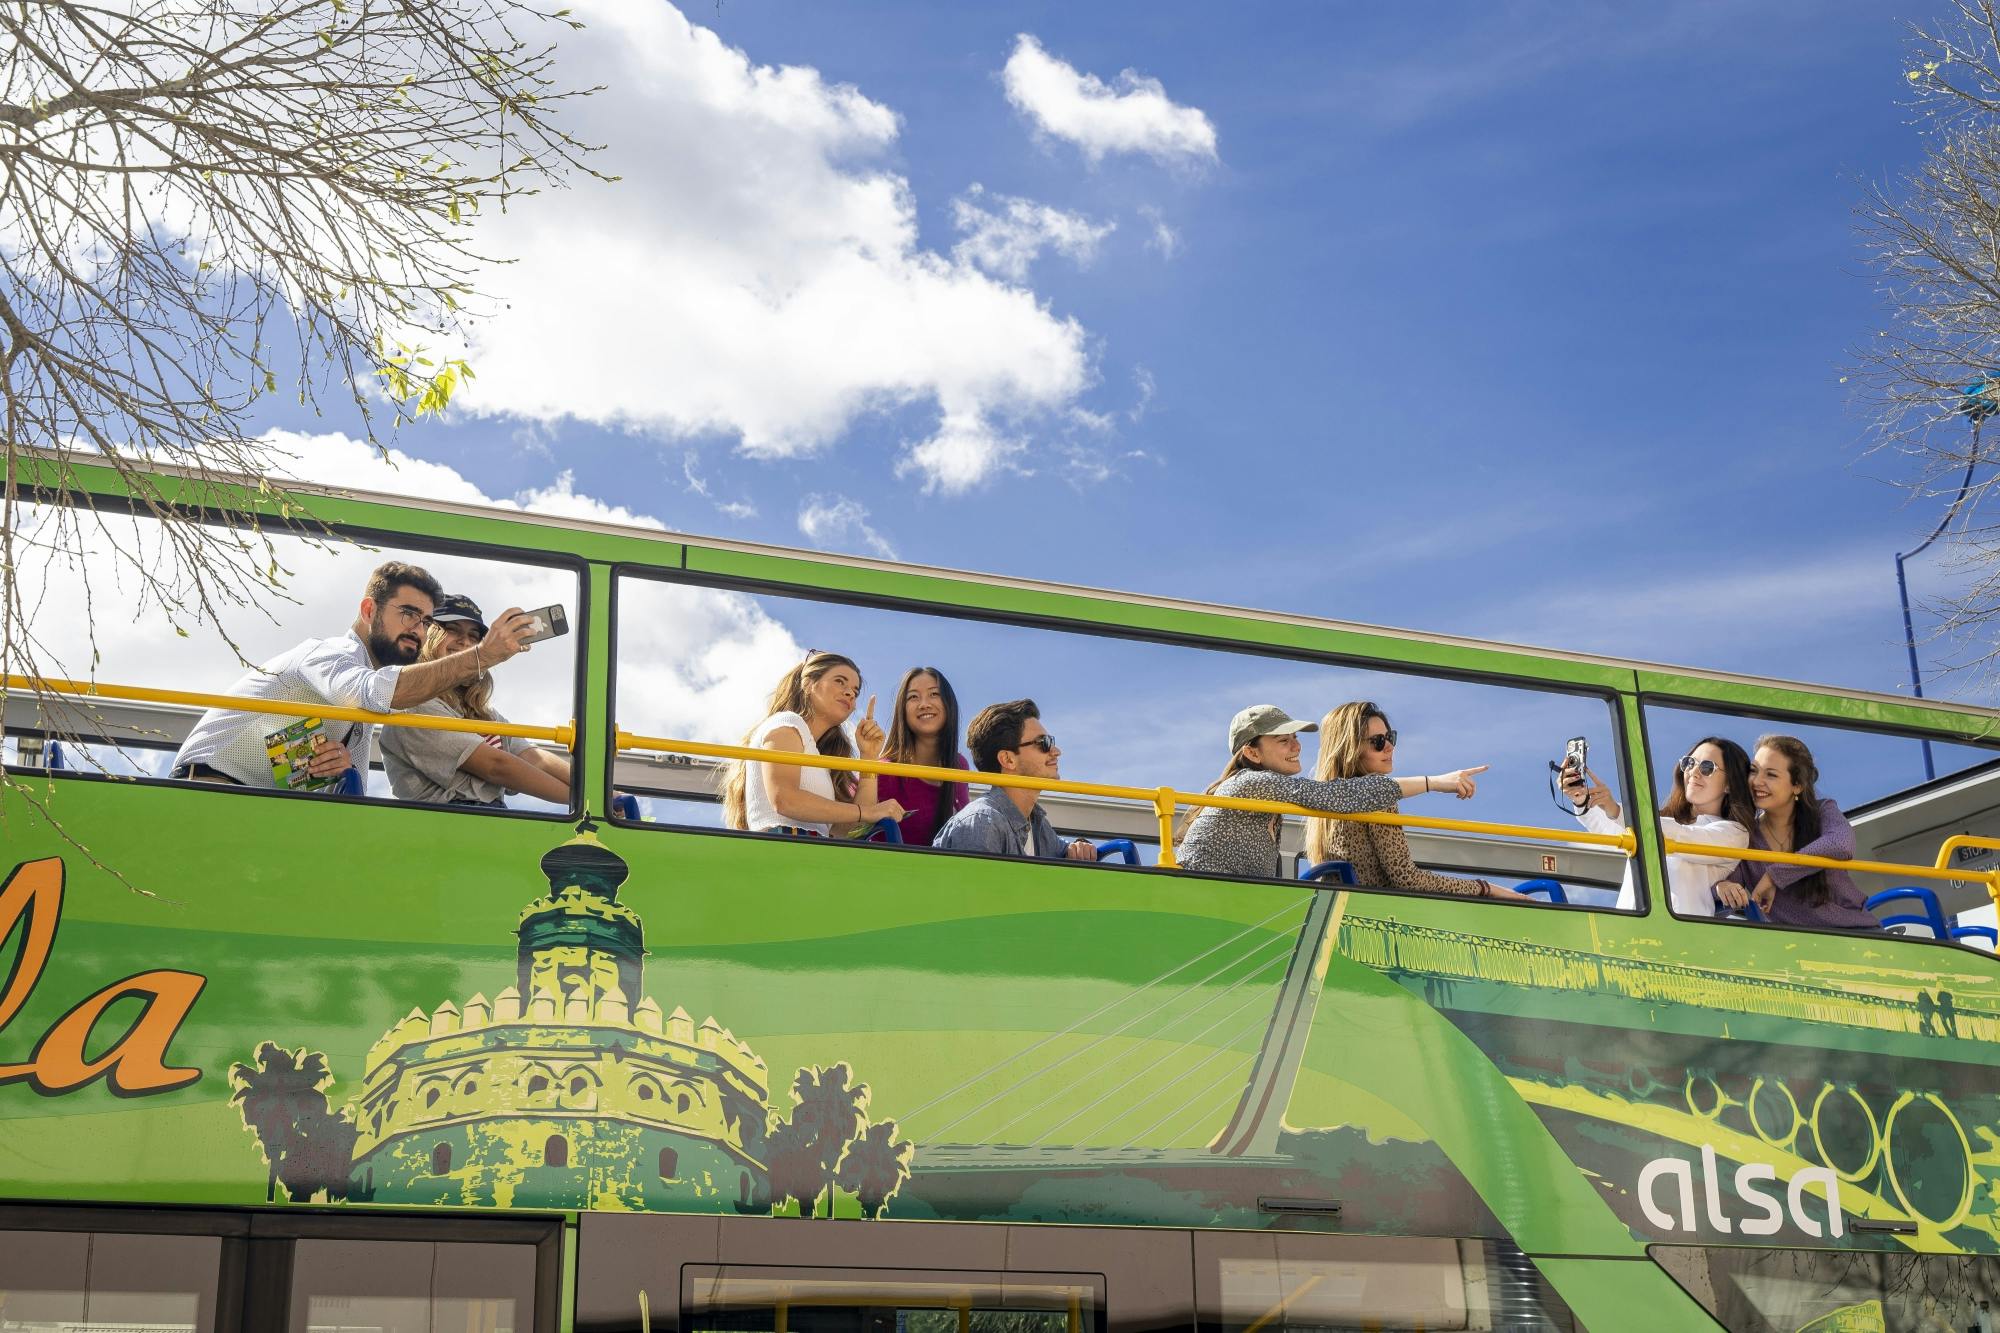 48hours Green Ticket Turistic bus Seville